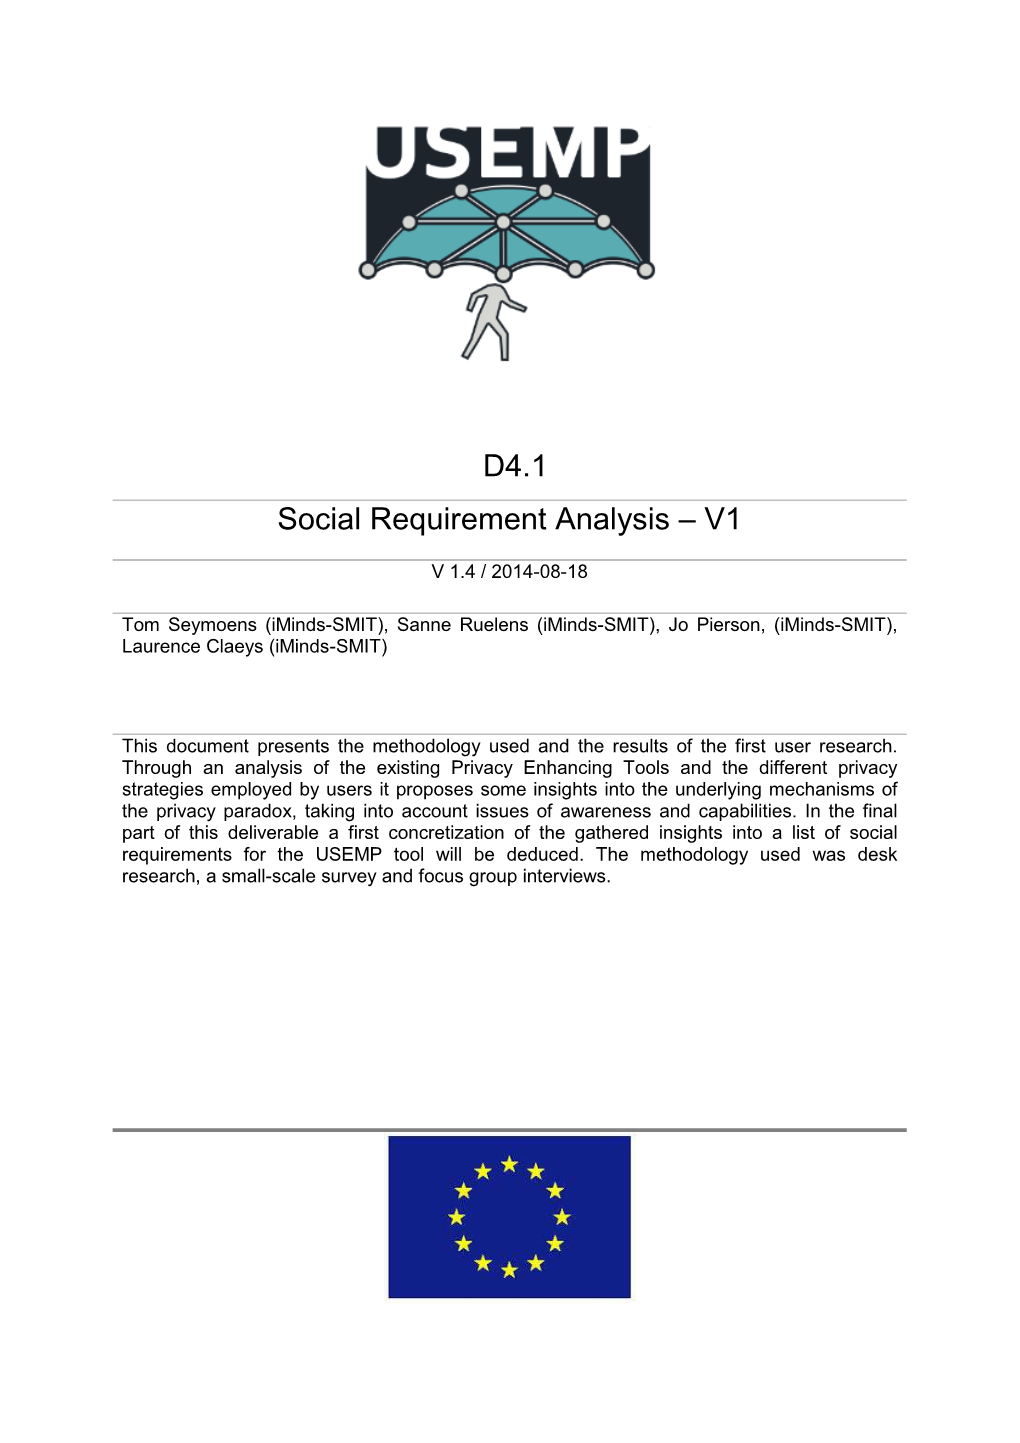 D4.1 Social Requirement Analysis – V1